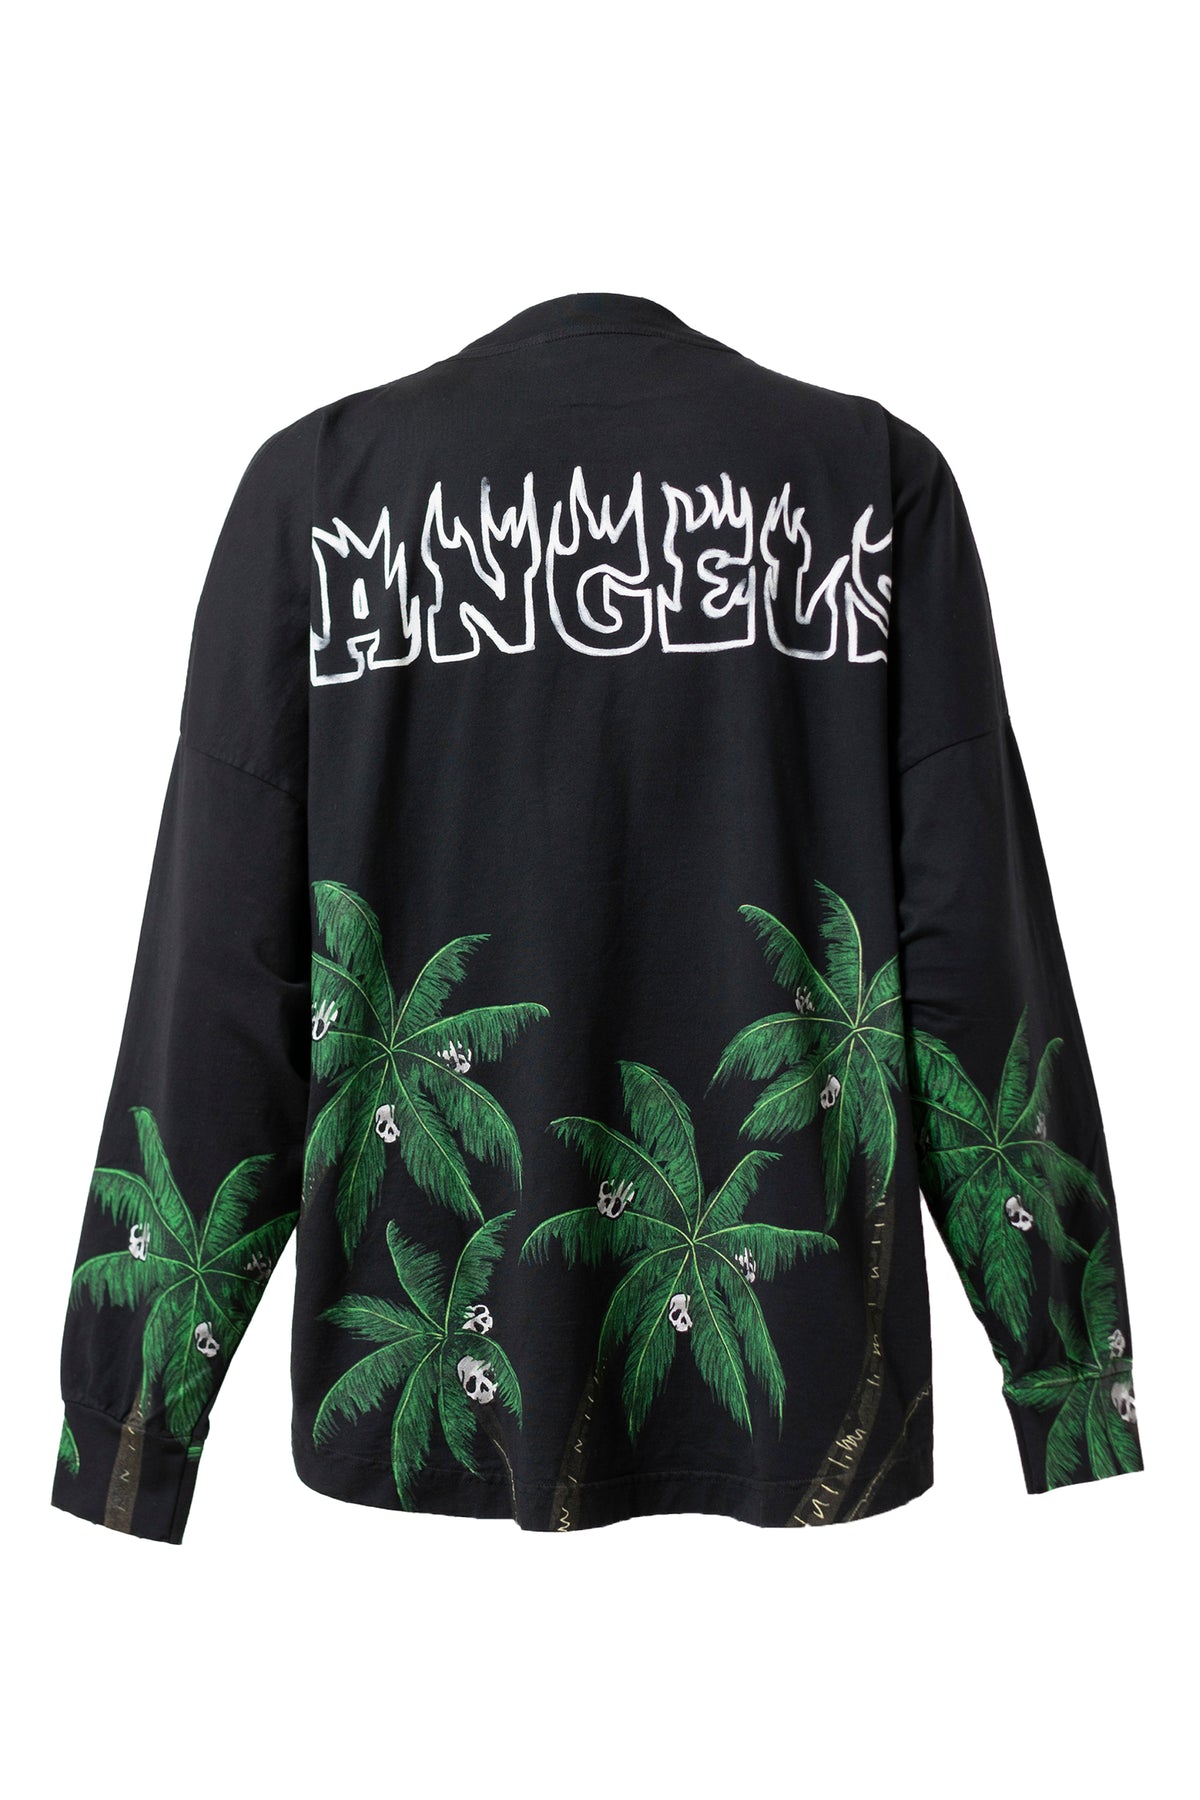 Palm Angels PALMS&SKULL OVER TEE L/S / BLK GRN